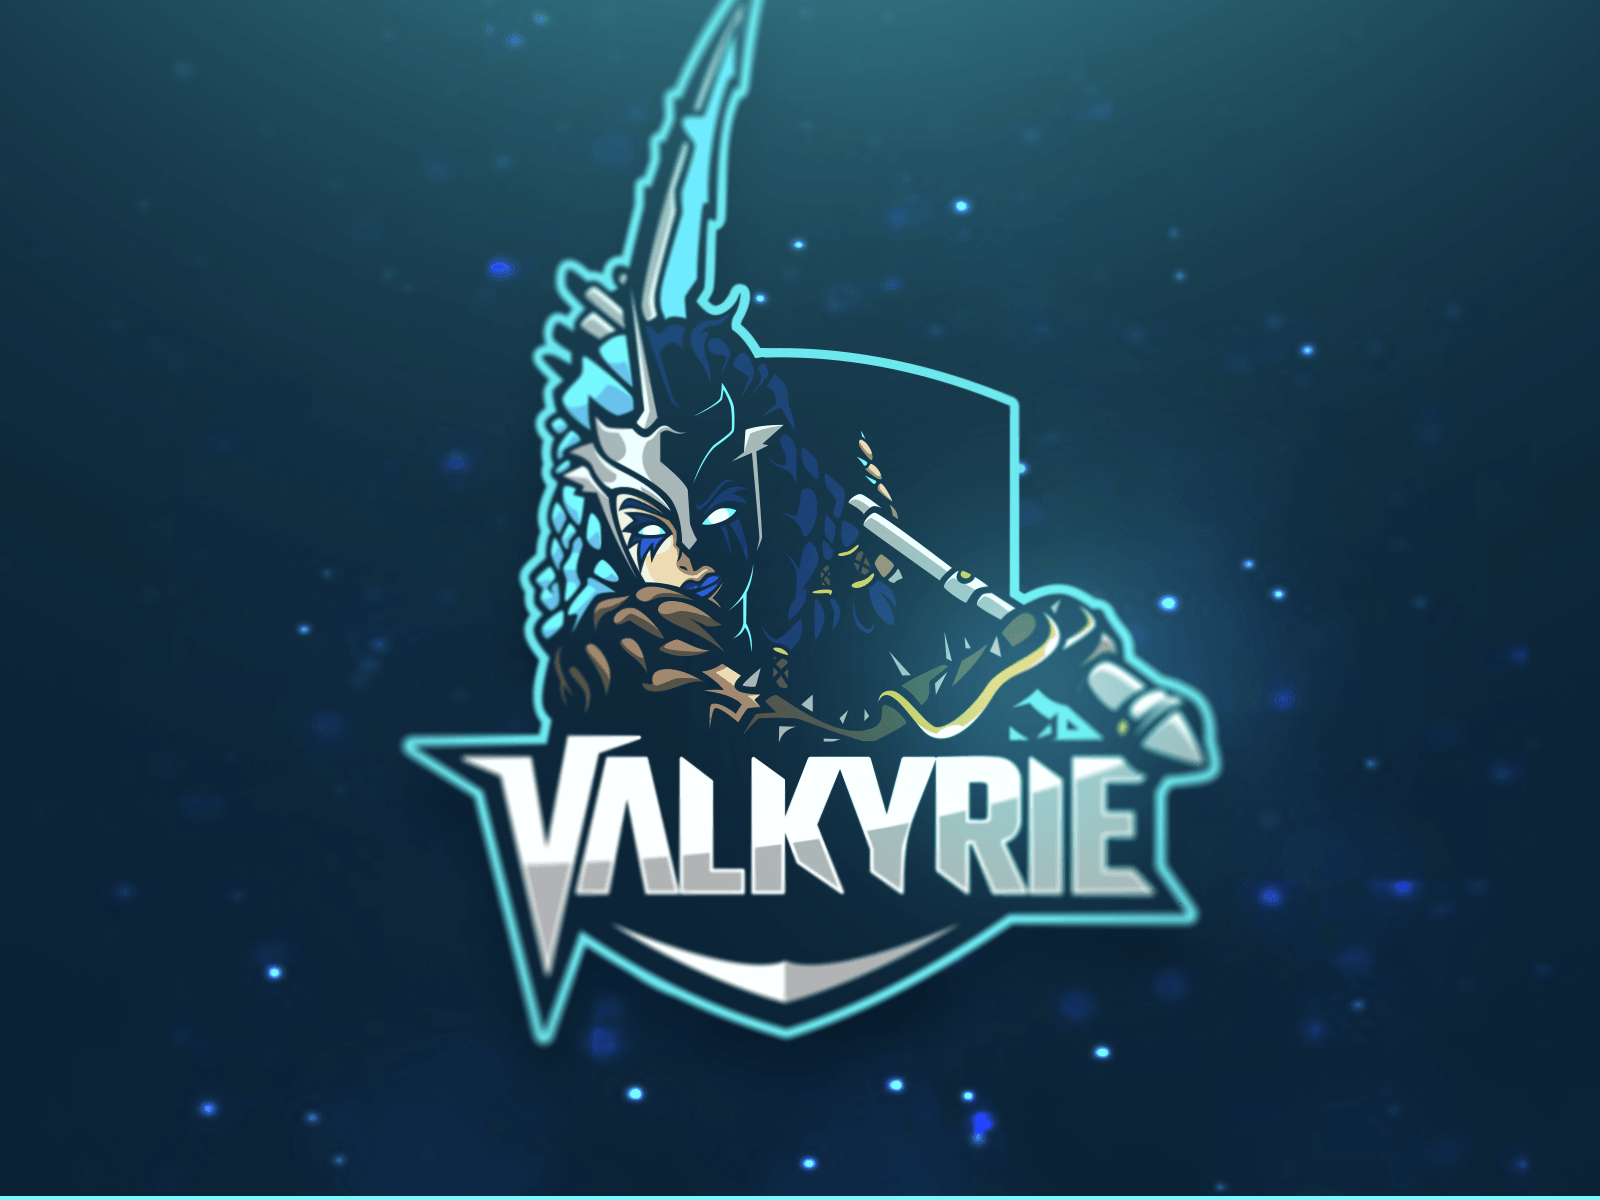 Valkyrie Fortnite Wallpapers Top Free Valkyrie Fortnite Backgrounds Wallpaperaccess